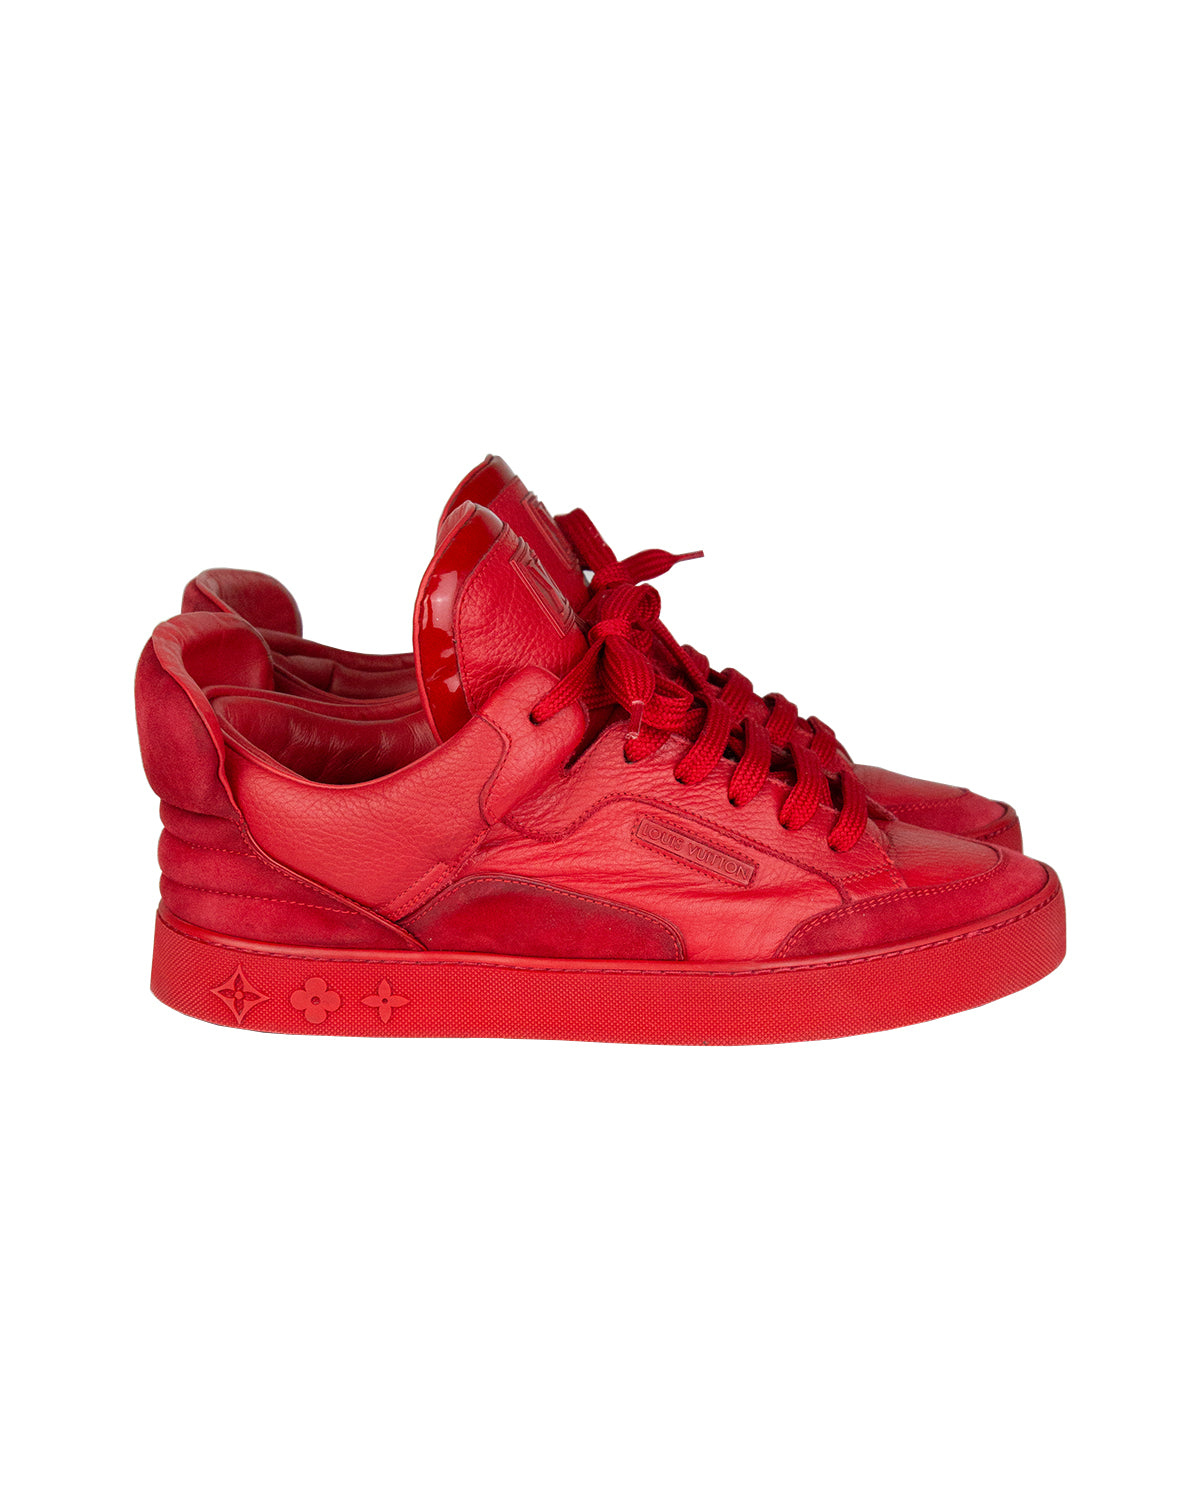 Size+8+-+Louis+Vuitton+Don+x+Kanye+West+Red+2009 for sale online